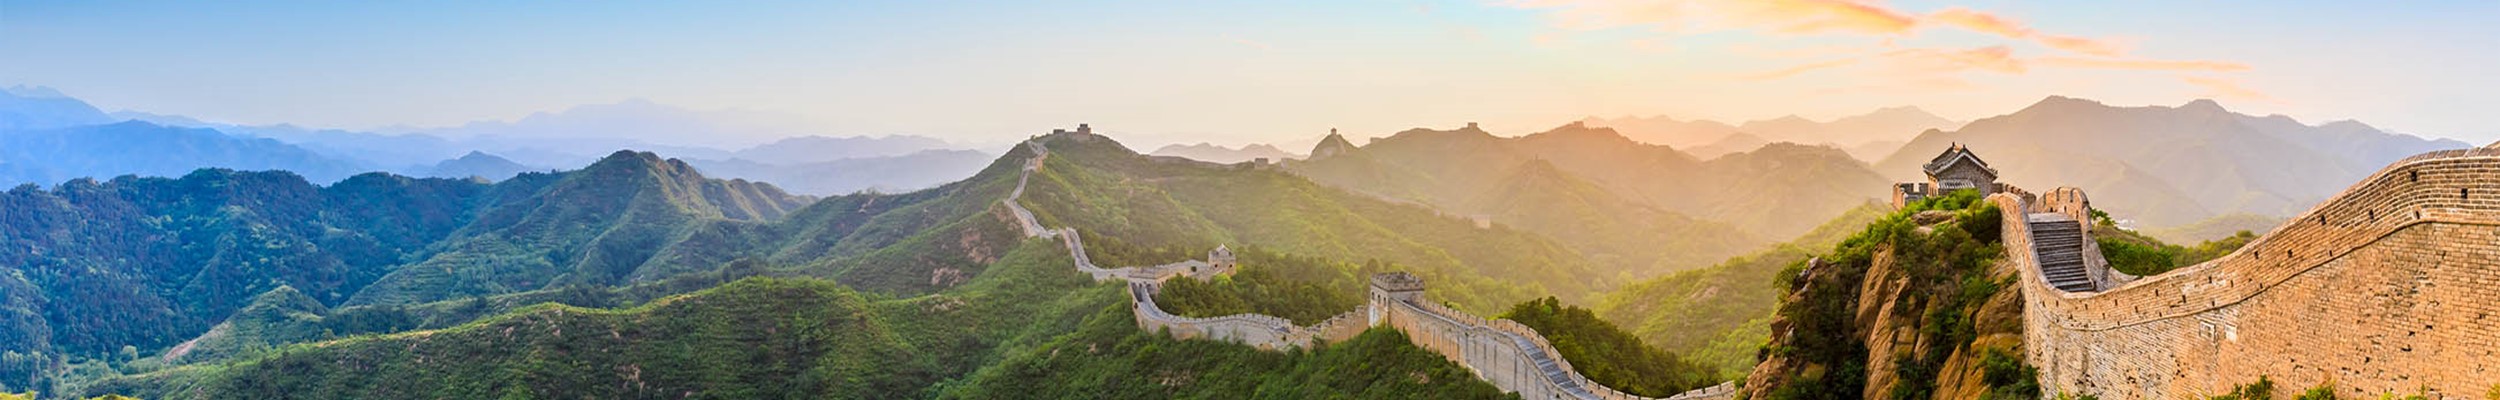 Great Wall of China landscape